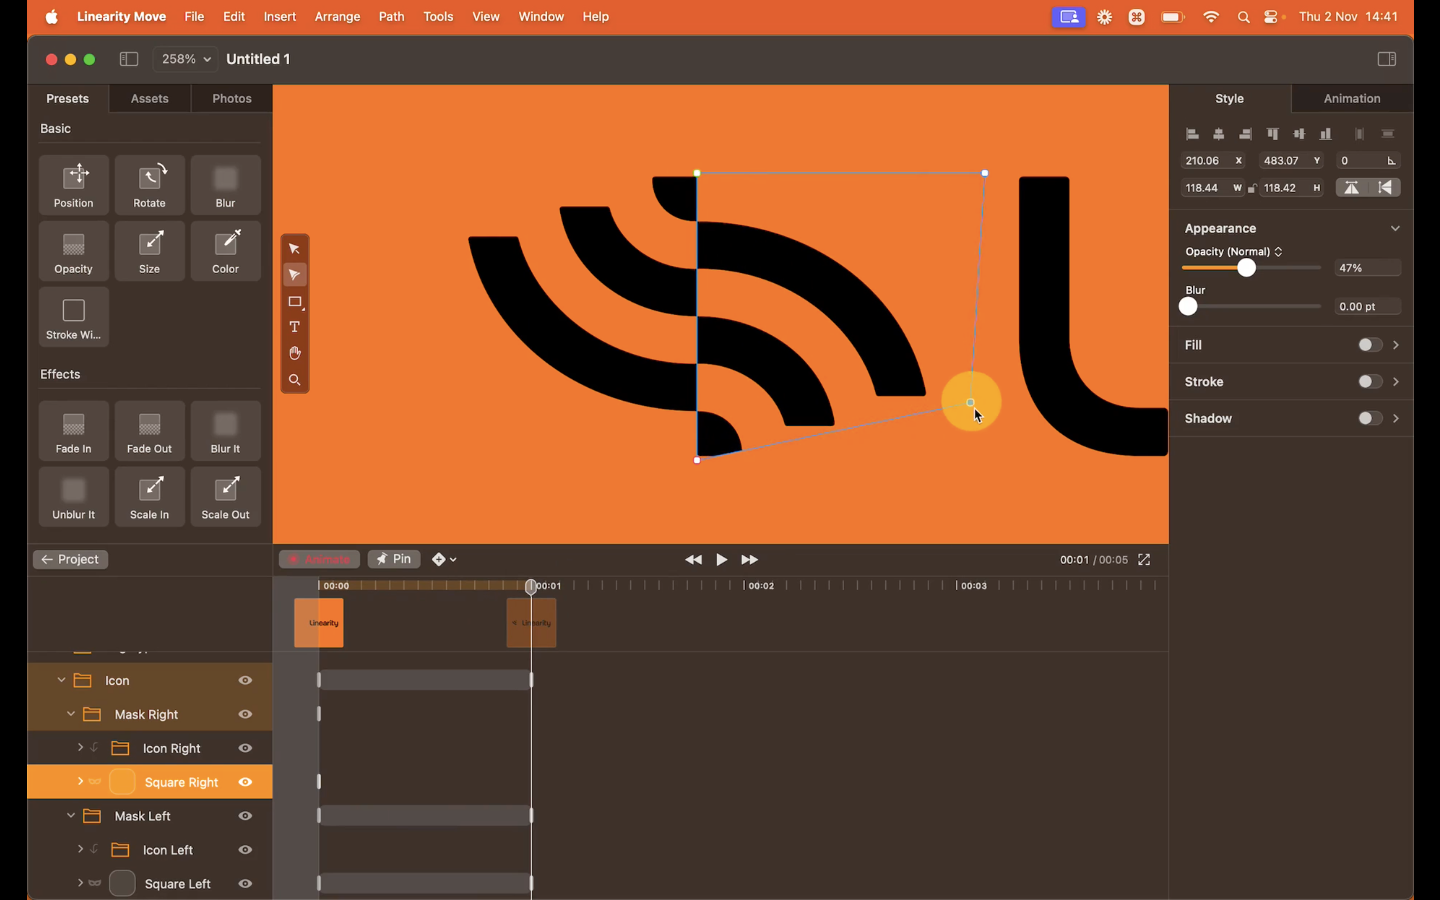 How to animate a logo + linearity + animate masks 2